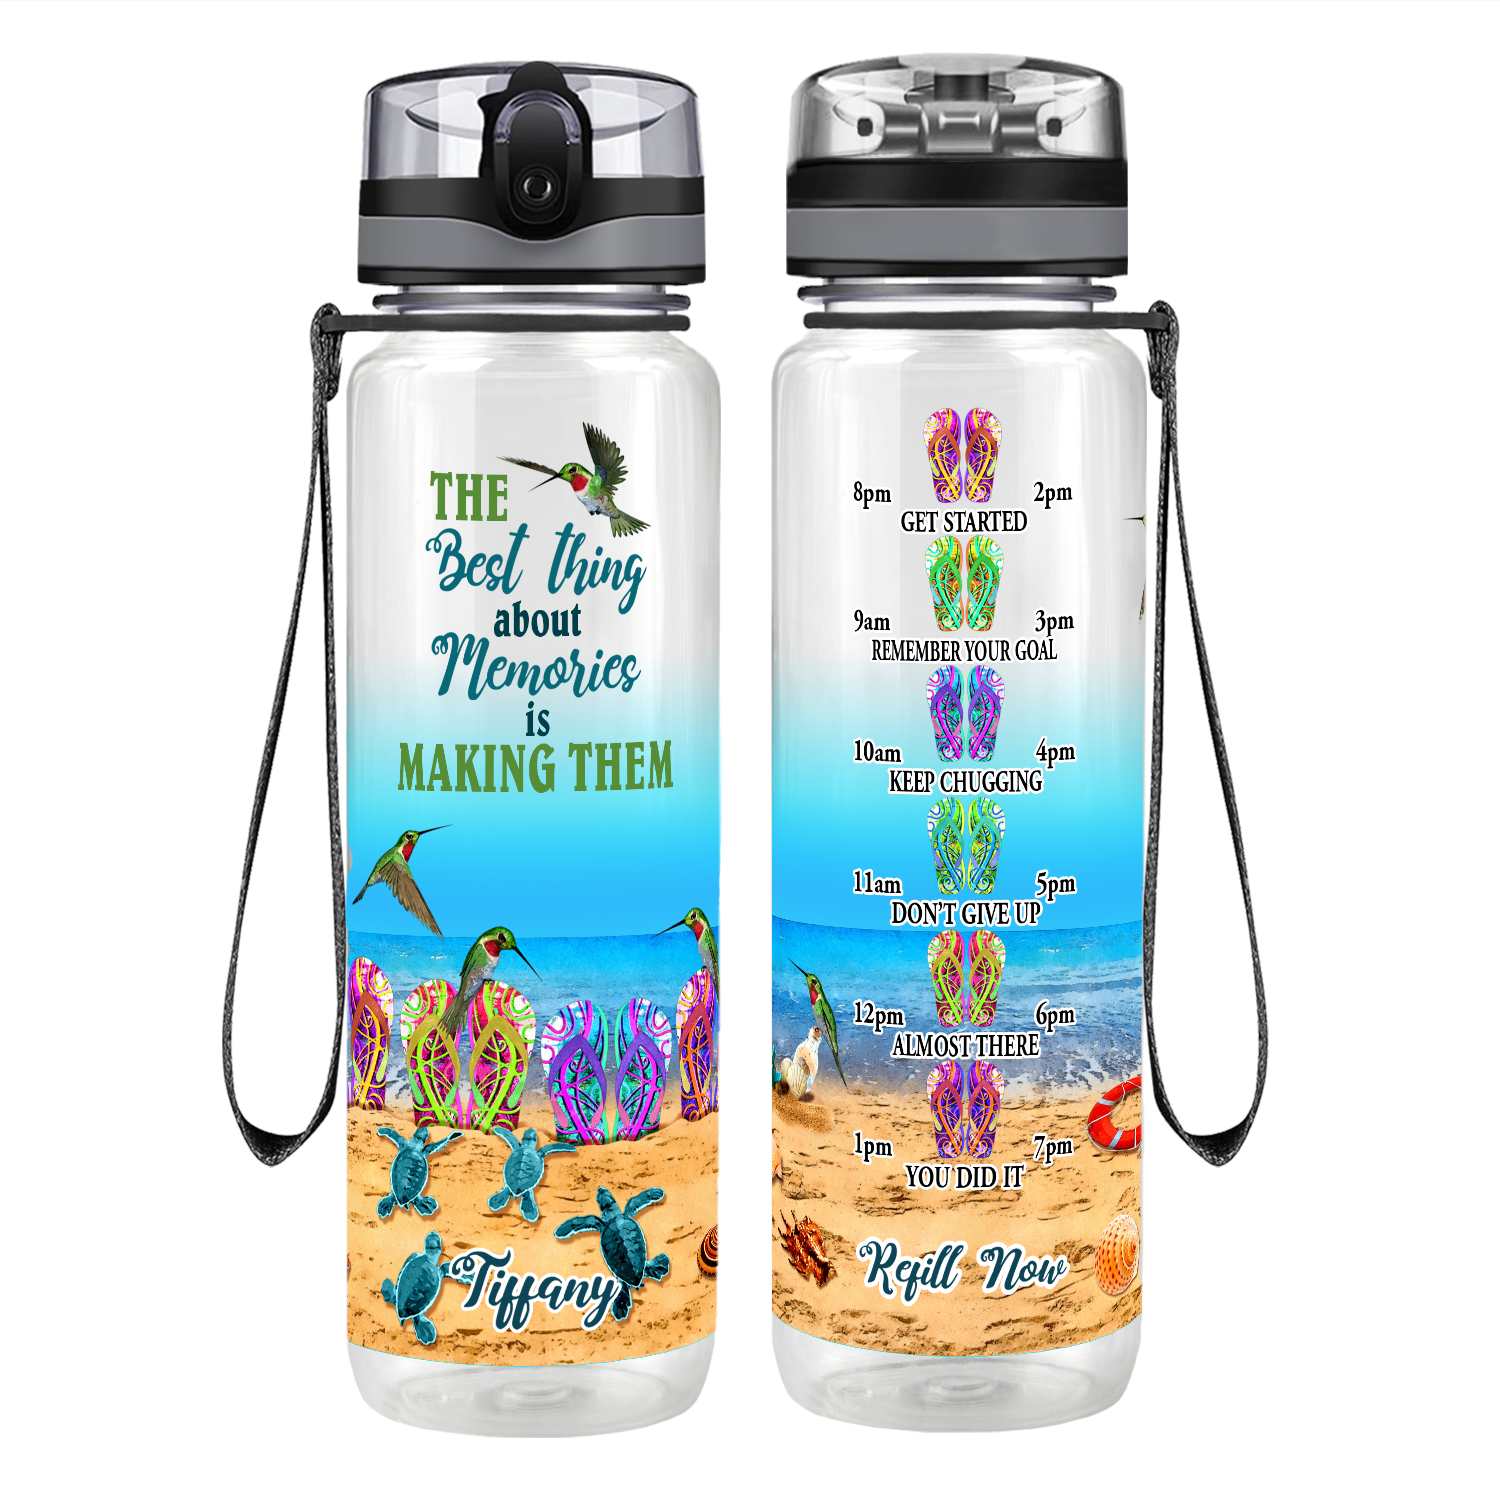 Personalized The Best Thing About Memories Motivational Tracking Water Bottle